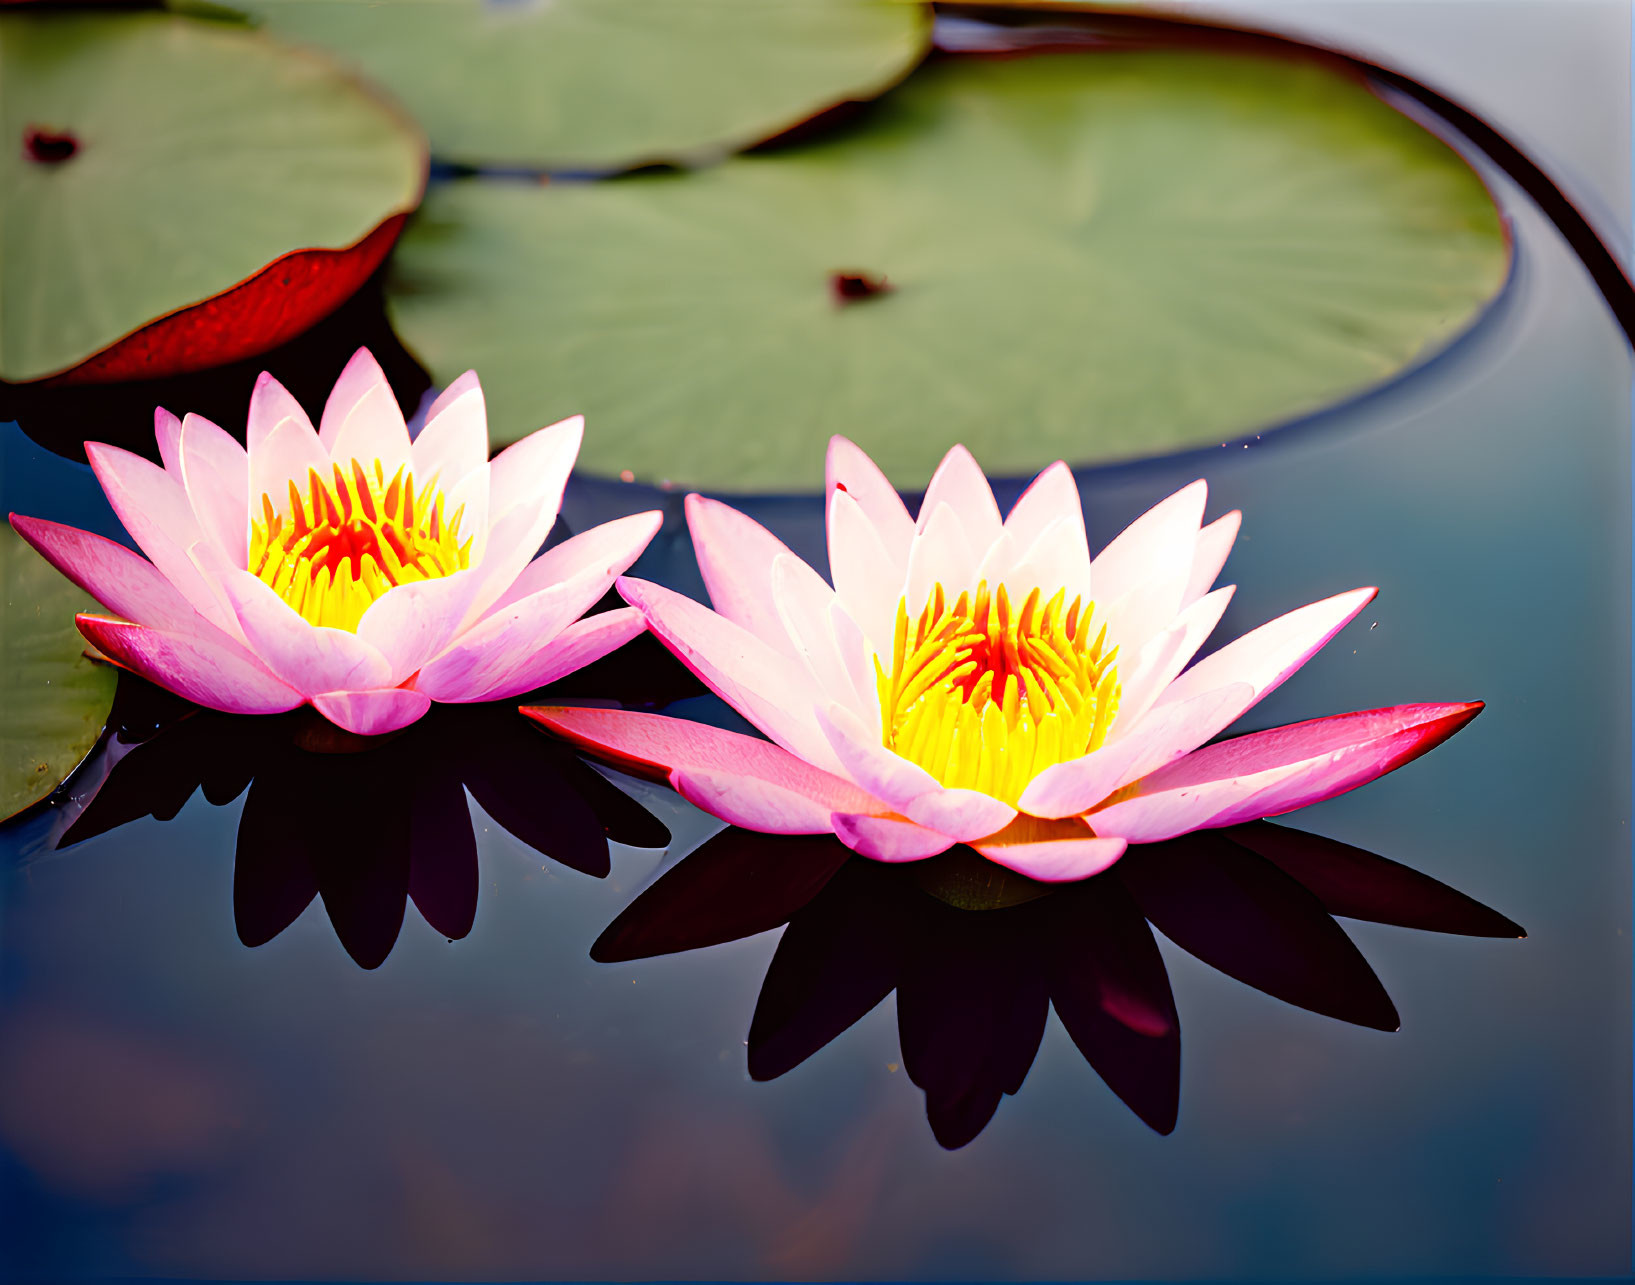 Vibrant pink water lilies with yellow centers on calm pond with green lily pads